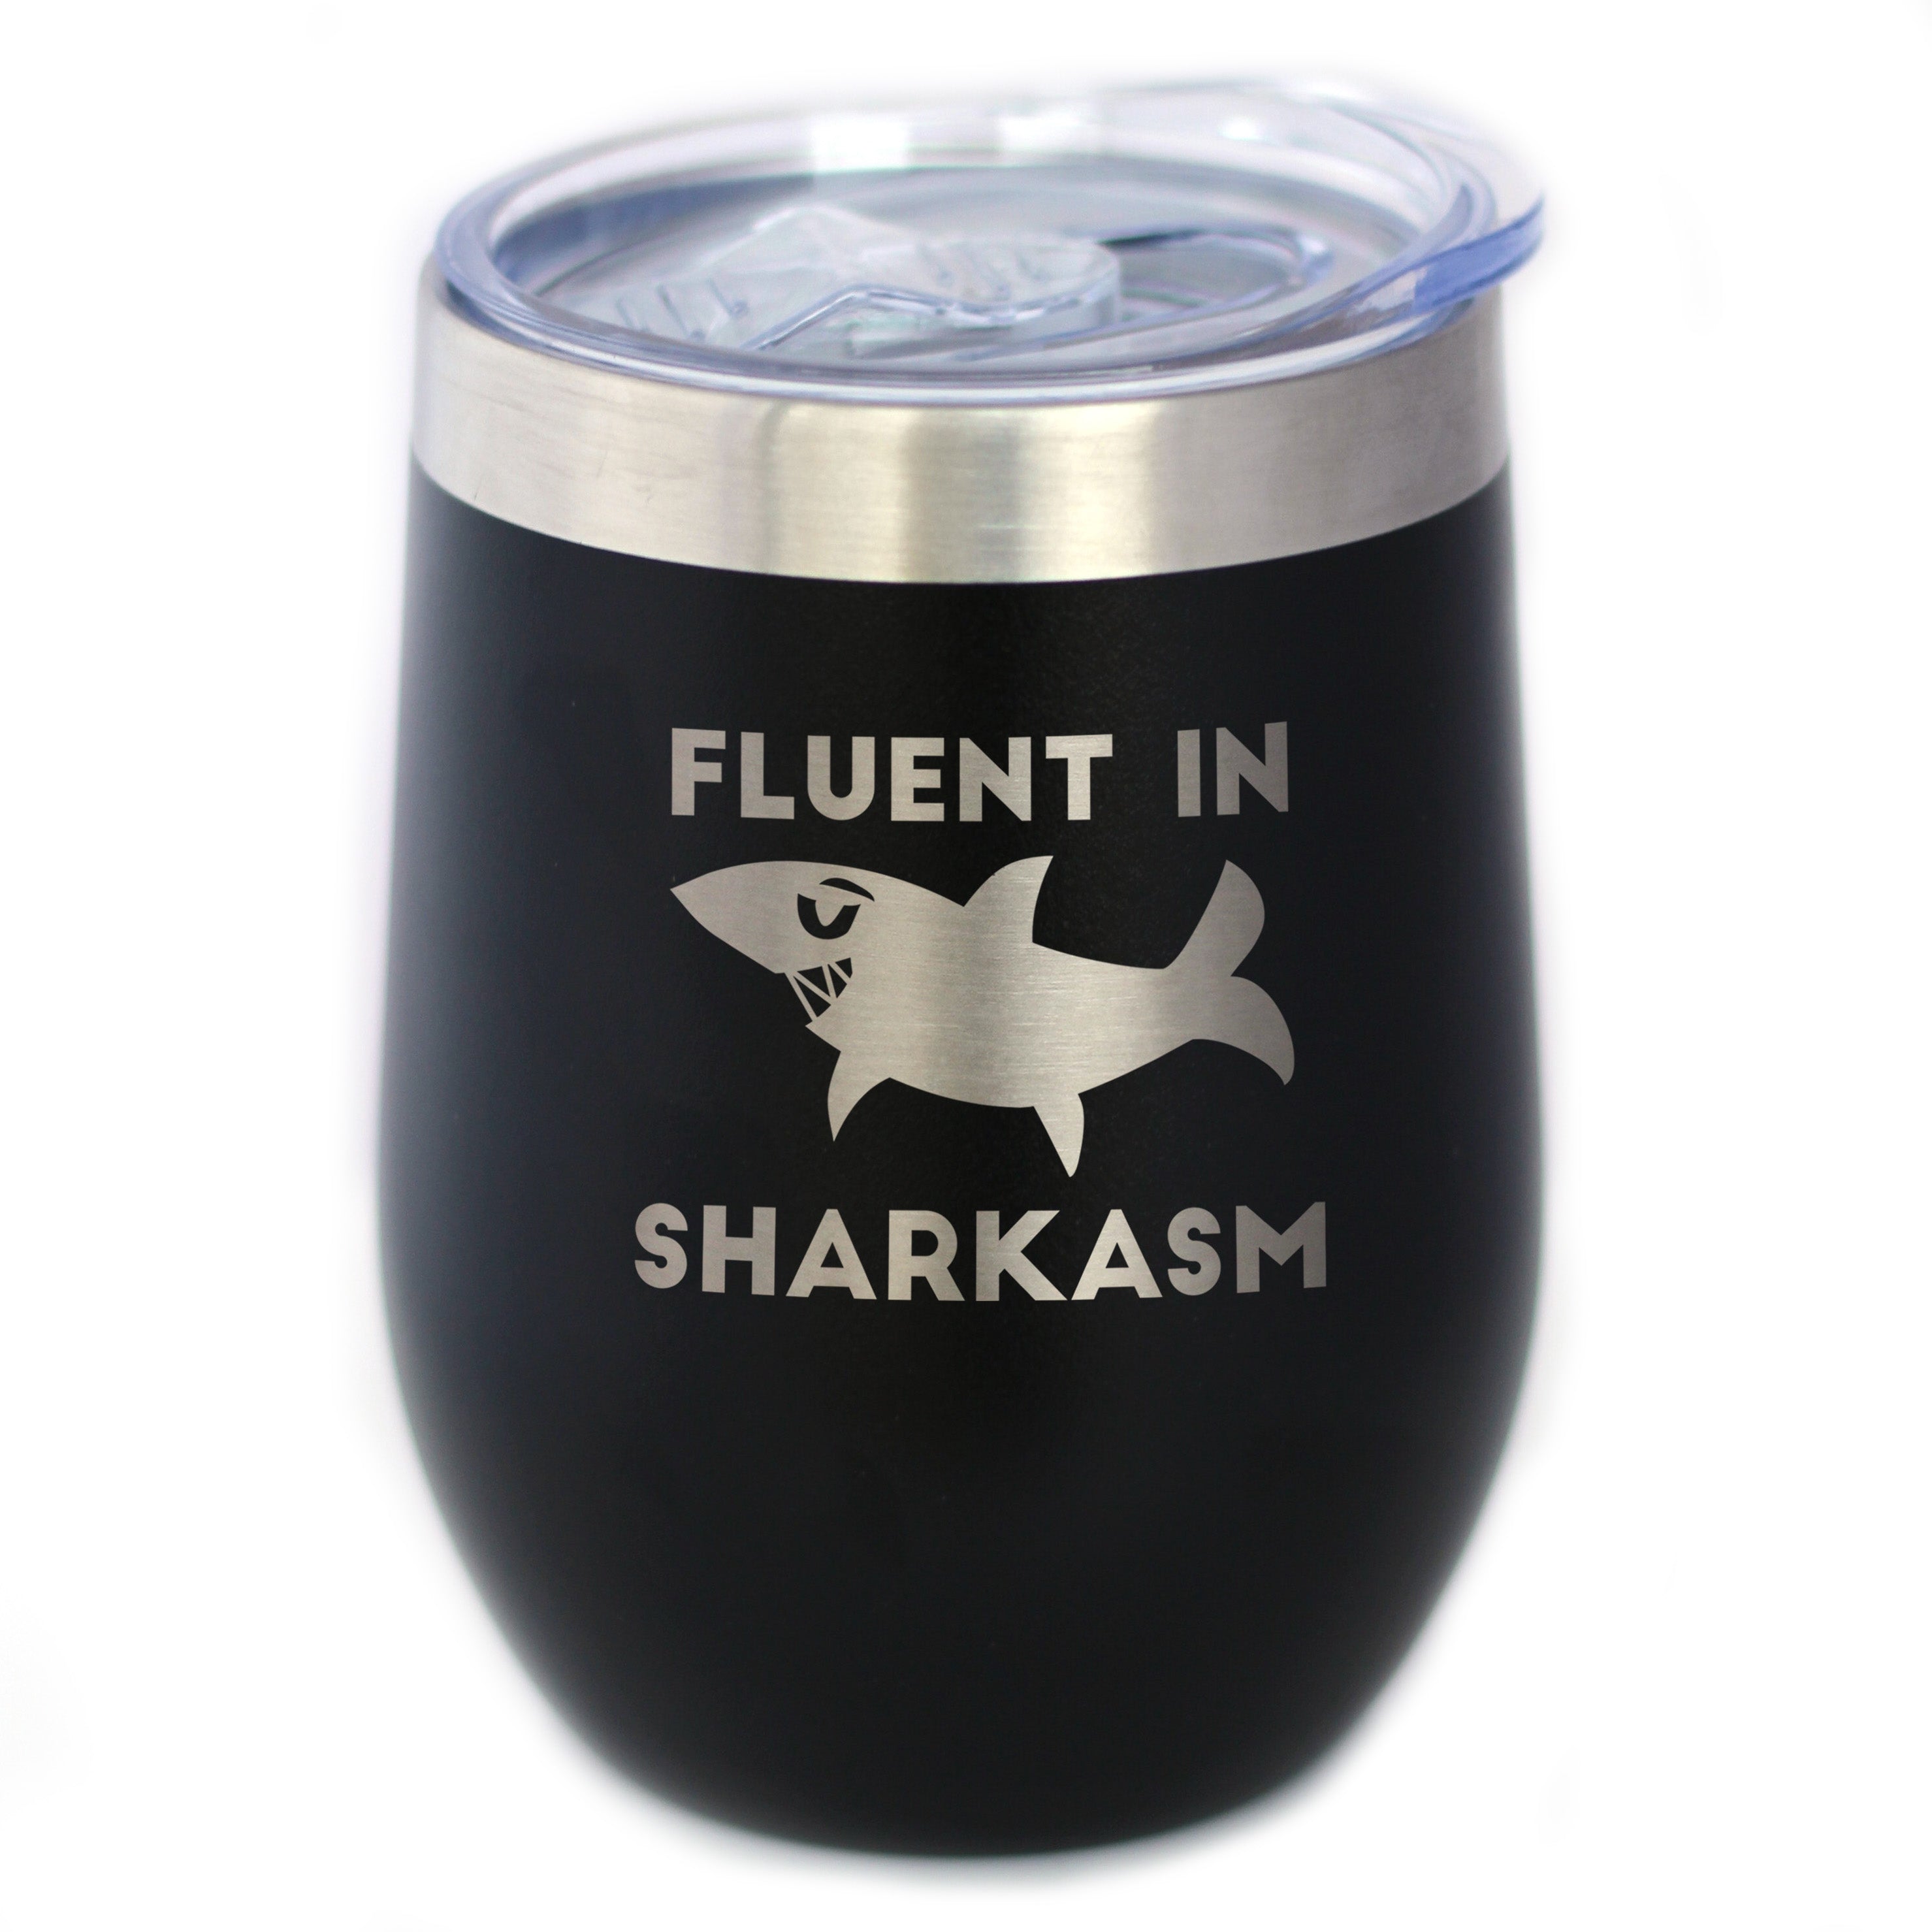 Fluent in Sharkasm - Funny Shark Pint Glass Gifts for Beer Drinking Me -  bevvee